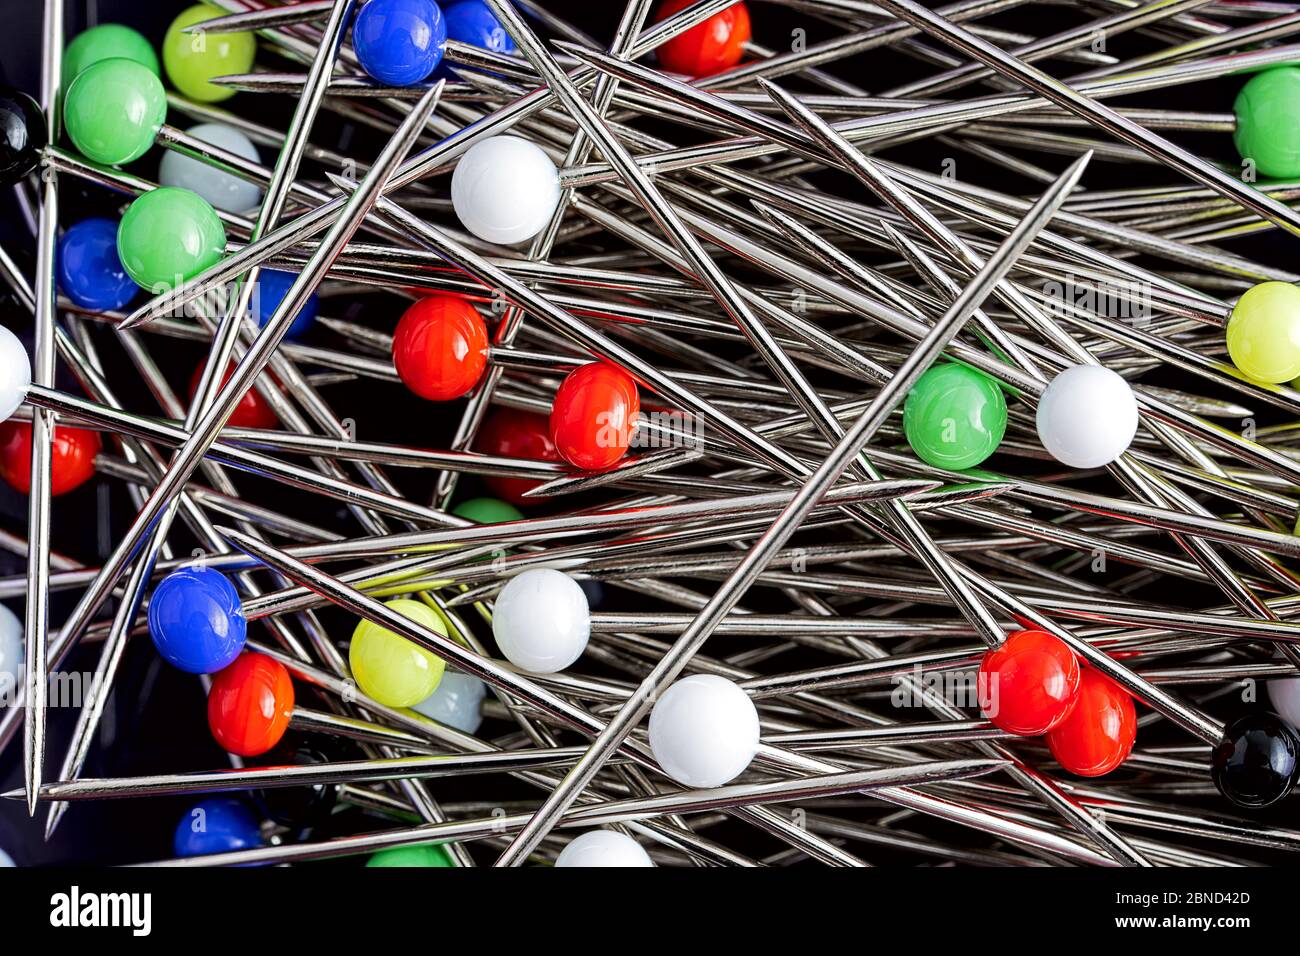 Image of Close Up View On Lots Of Sewing Pins With Colored Heads